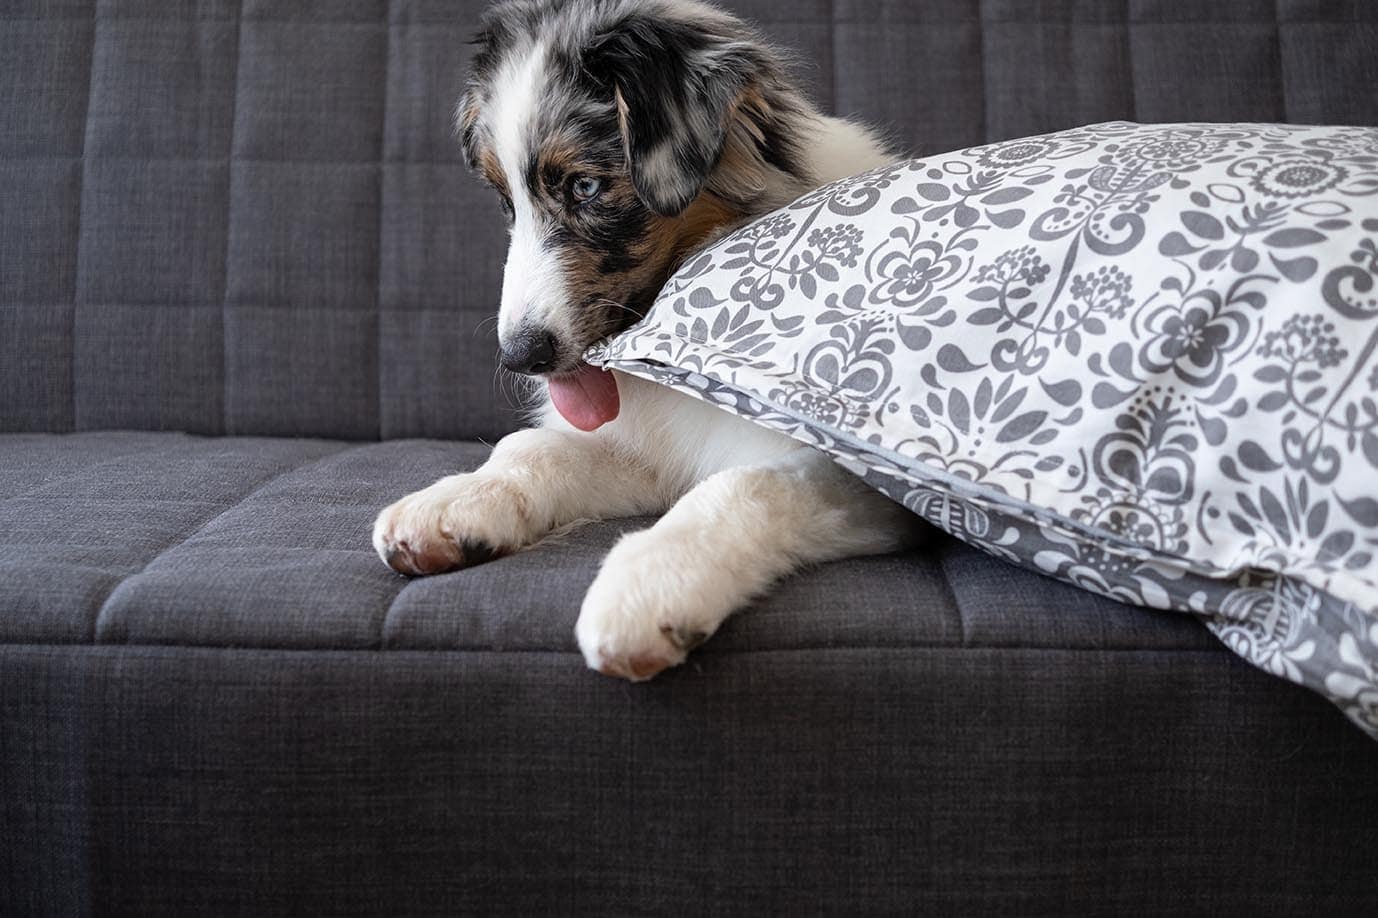 Why Does My Dog Bite Pillows